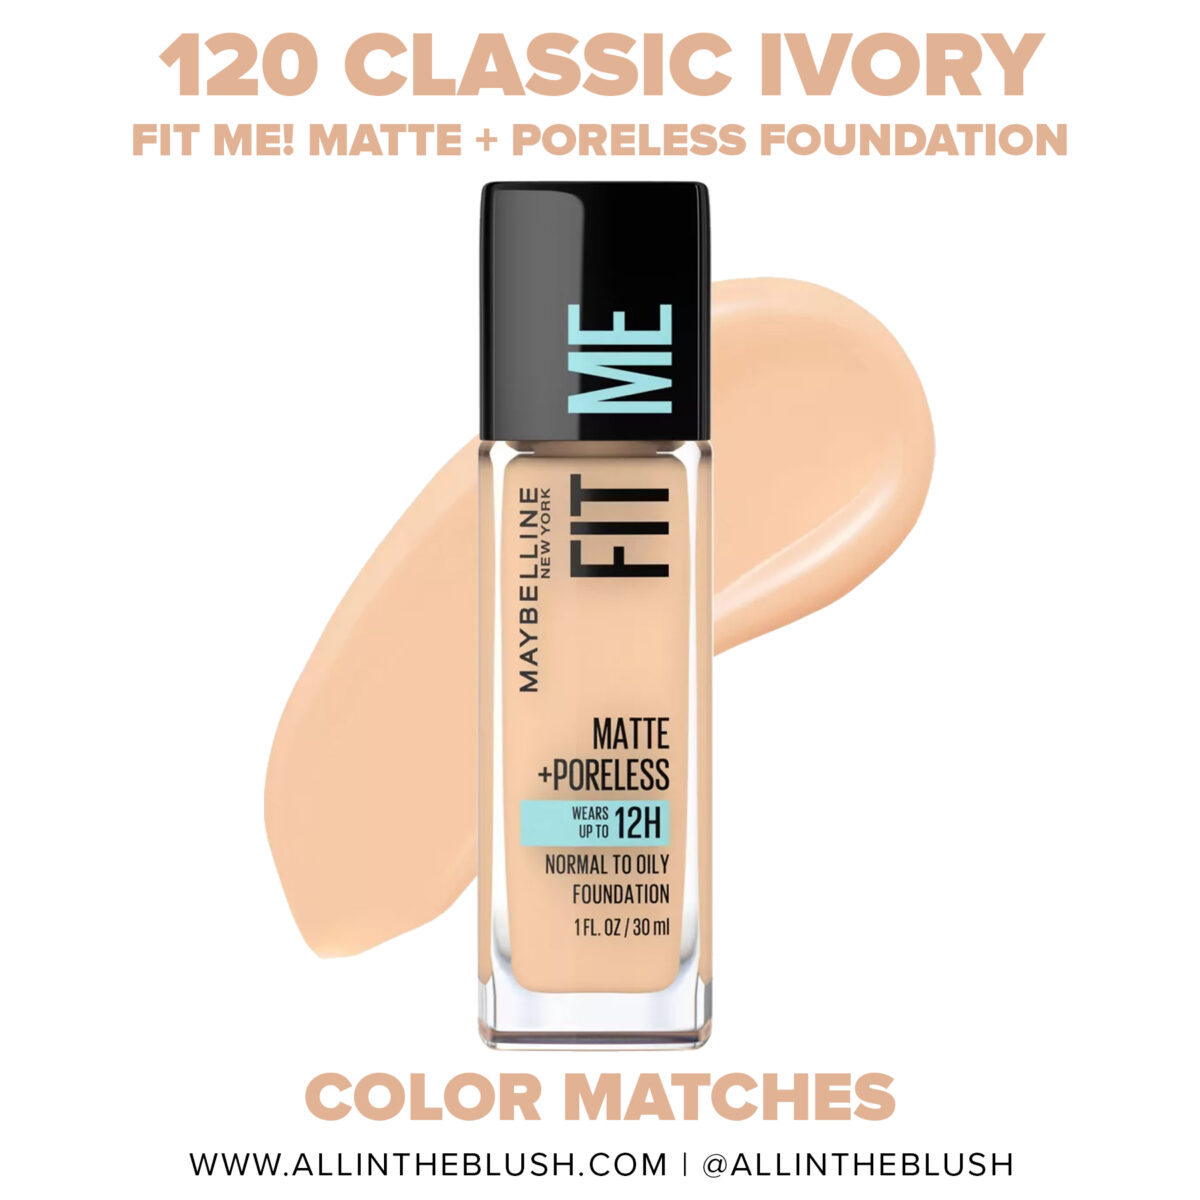 Maybelline 120 Classic Ivory FIT ME! Matte + Poreless Foundation Dupes